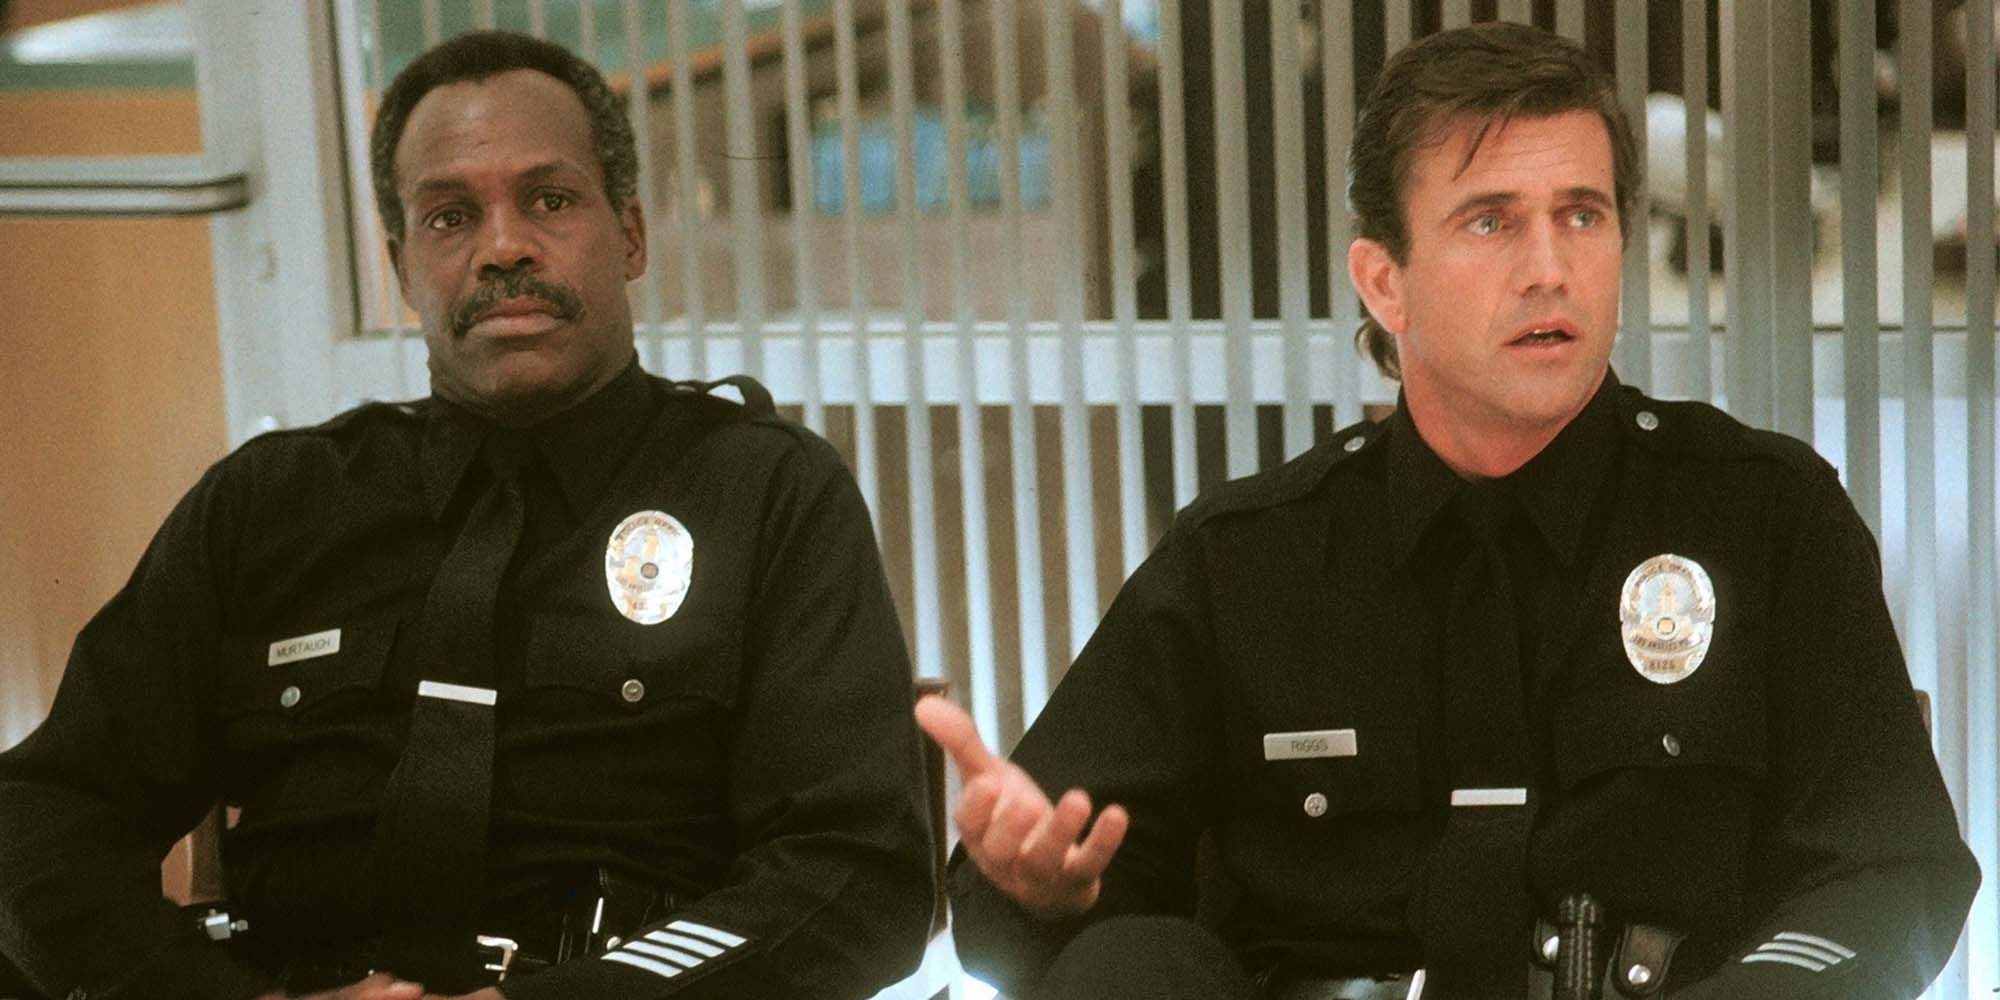 Danny Glover as Roger Murtaugh and Mel Gibson as Martin Riggs in Lethal Weapon 3